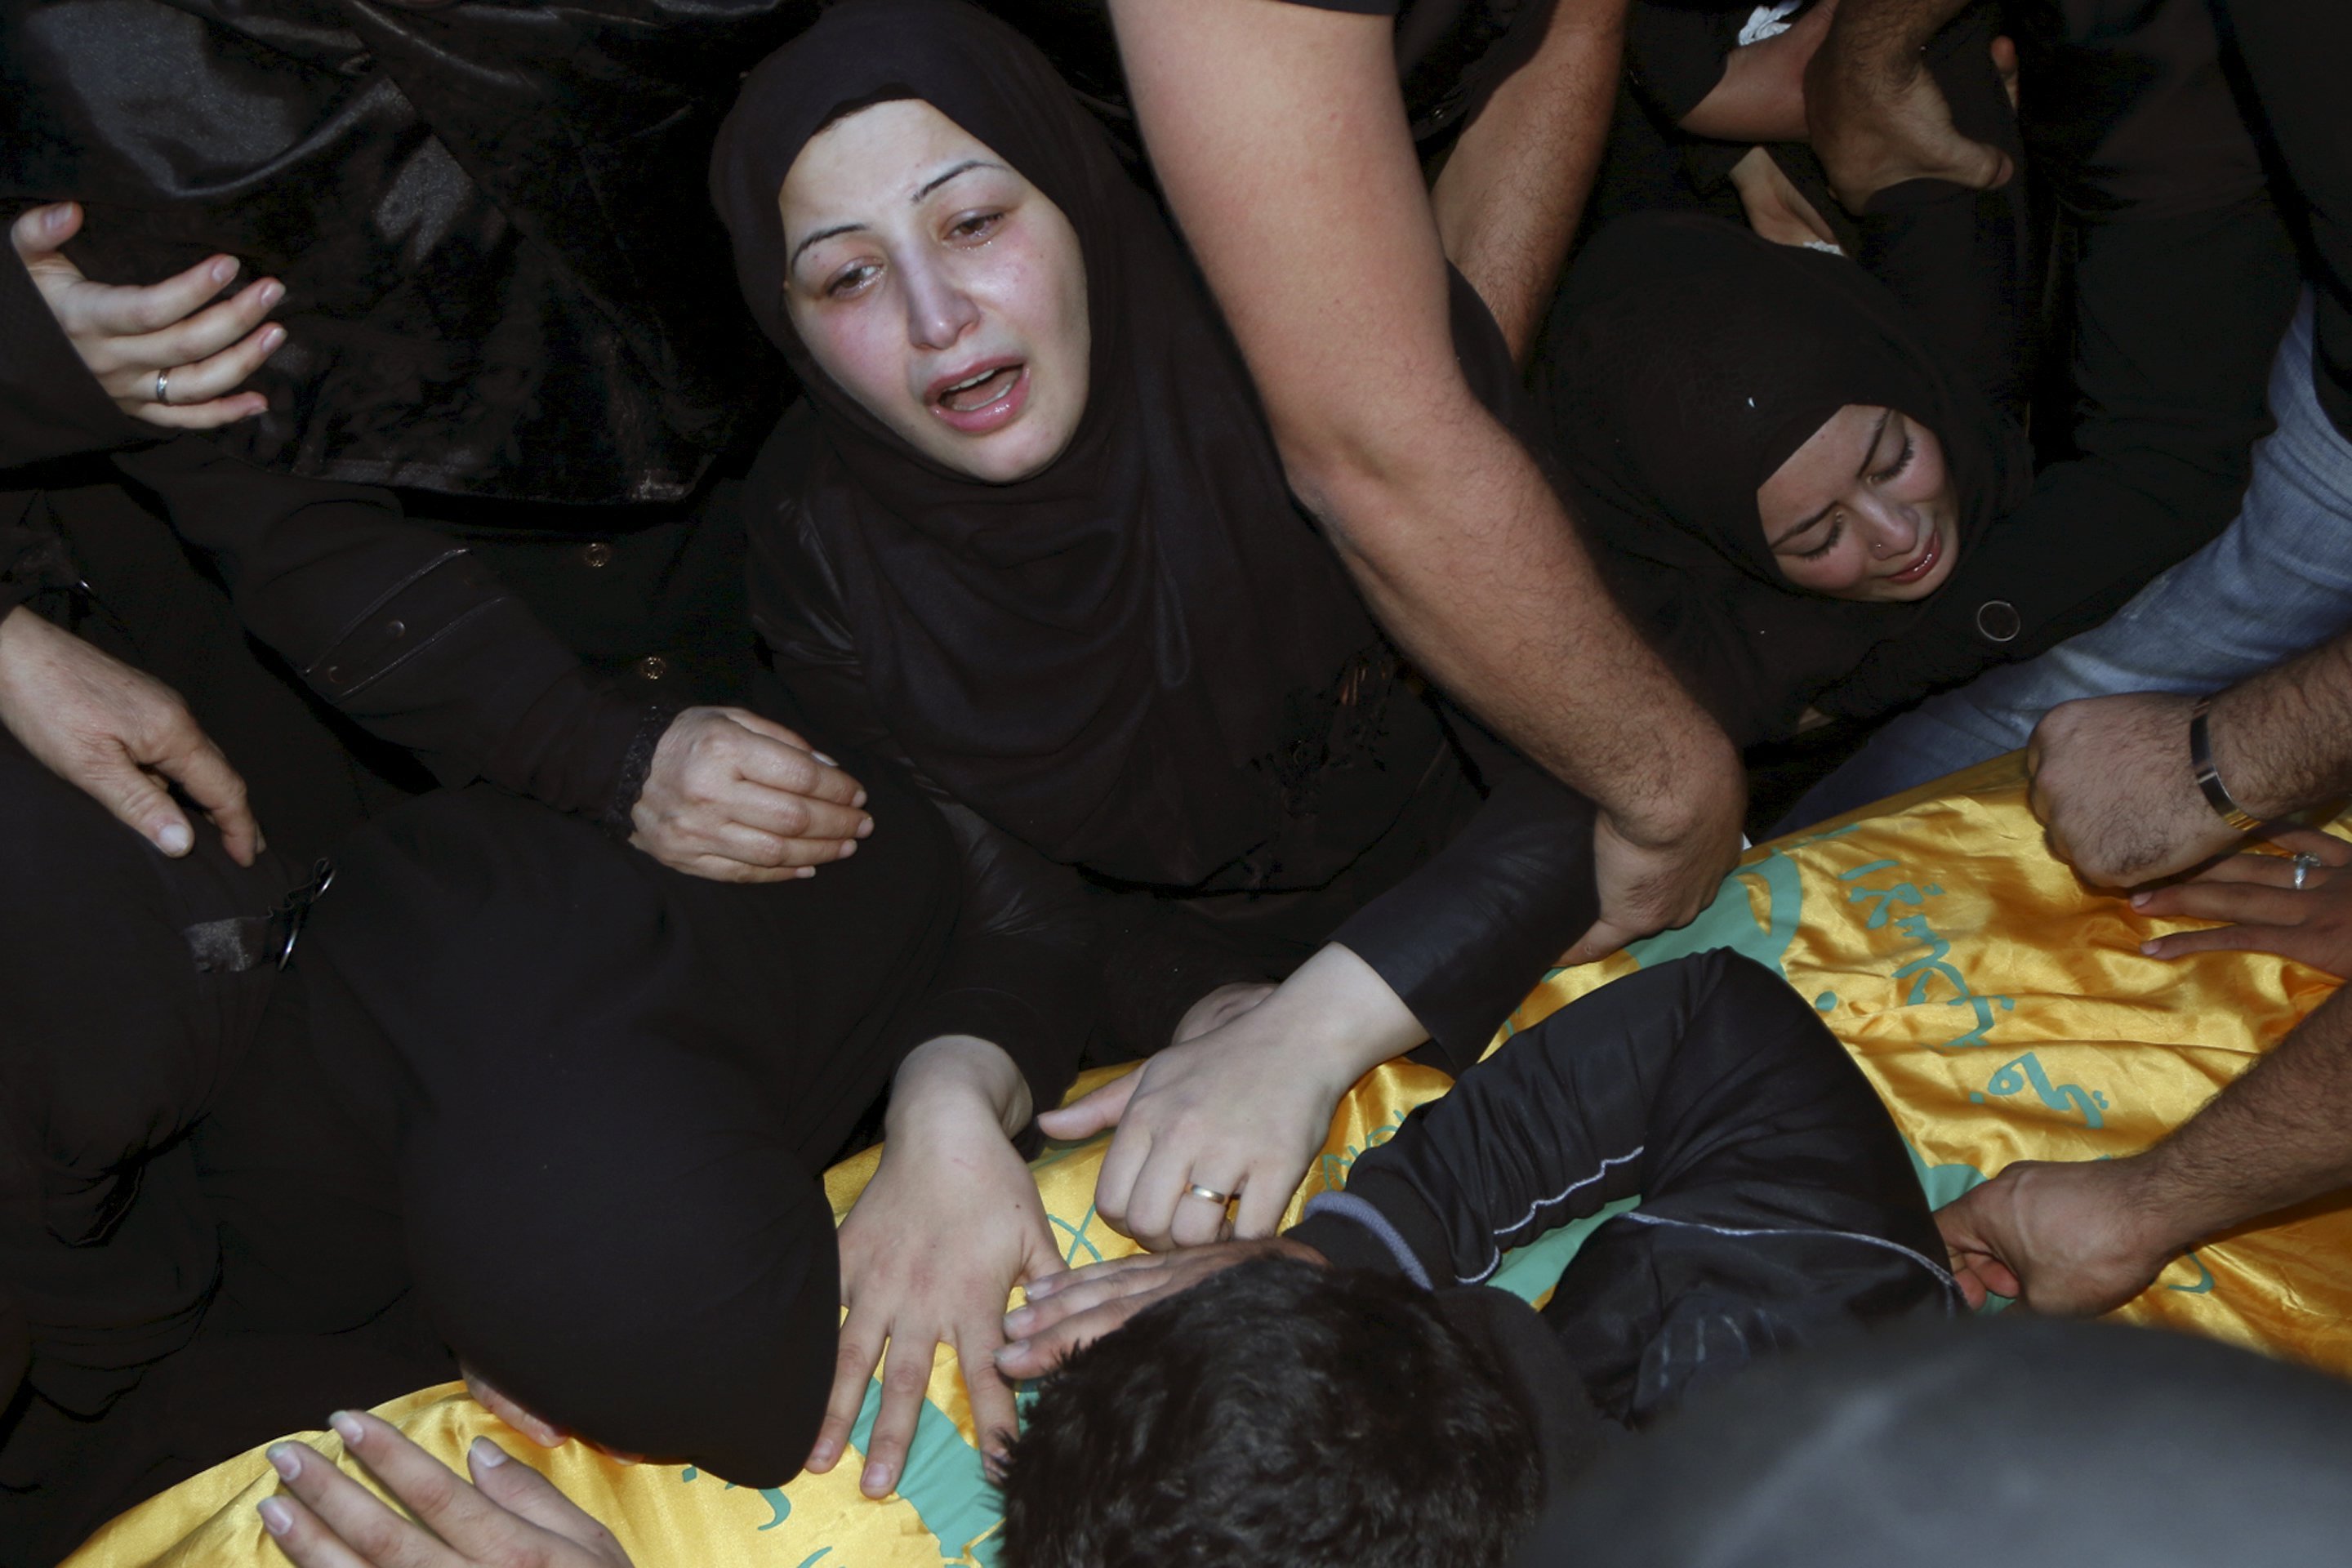 Relatives mourn over the coffin of Hezbollah member, Adel Akram Termos, who was killed in the two explosions that occurred on Thursday in Beirut's southern suburbs, during his funeral in Tallousa village, southern Lebanon on Nov. 13, 2015. (Karamallah Daher—REUTERS)